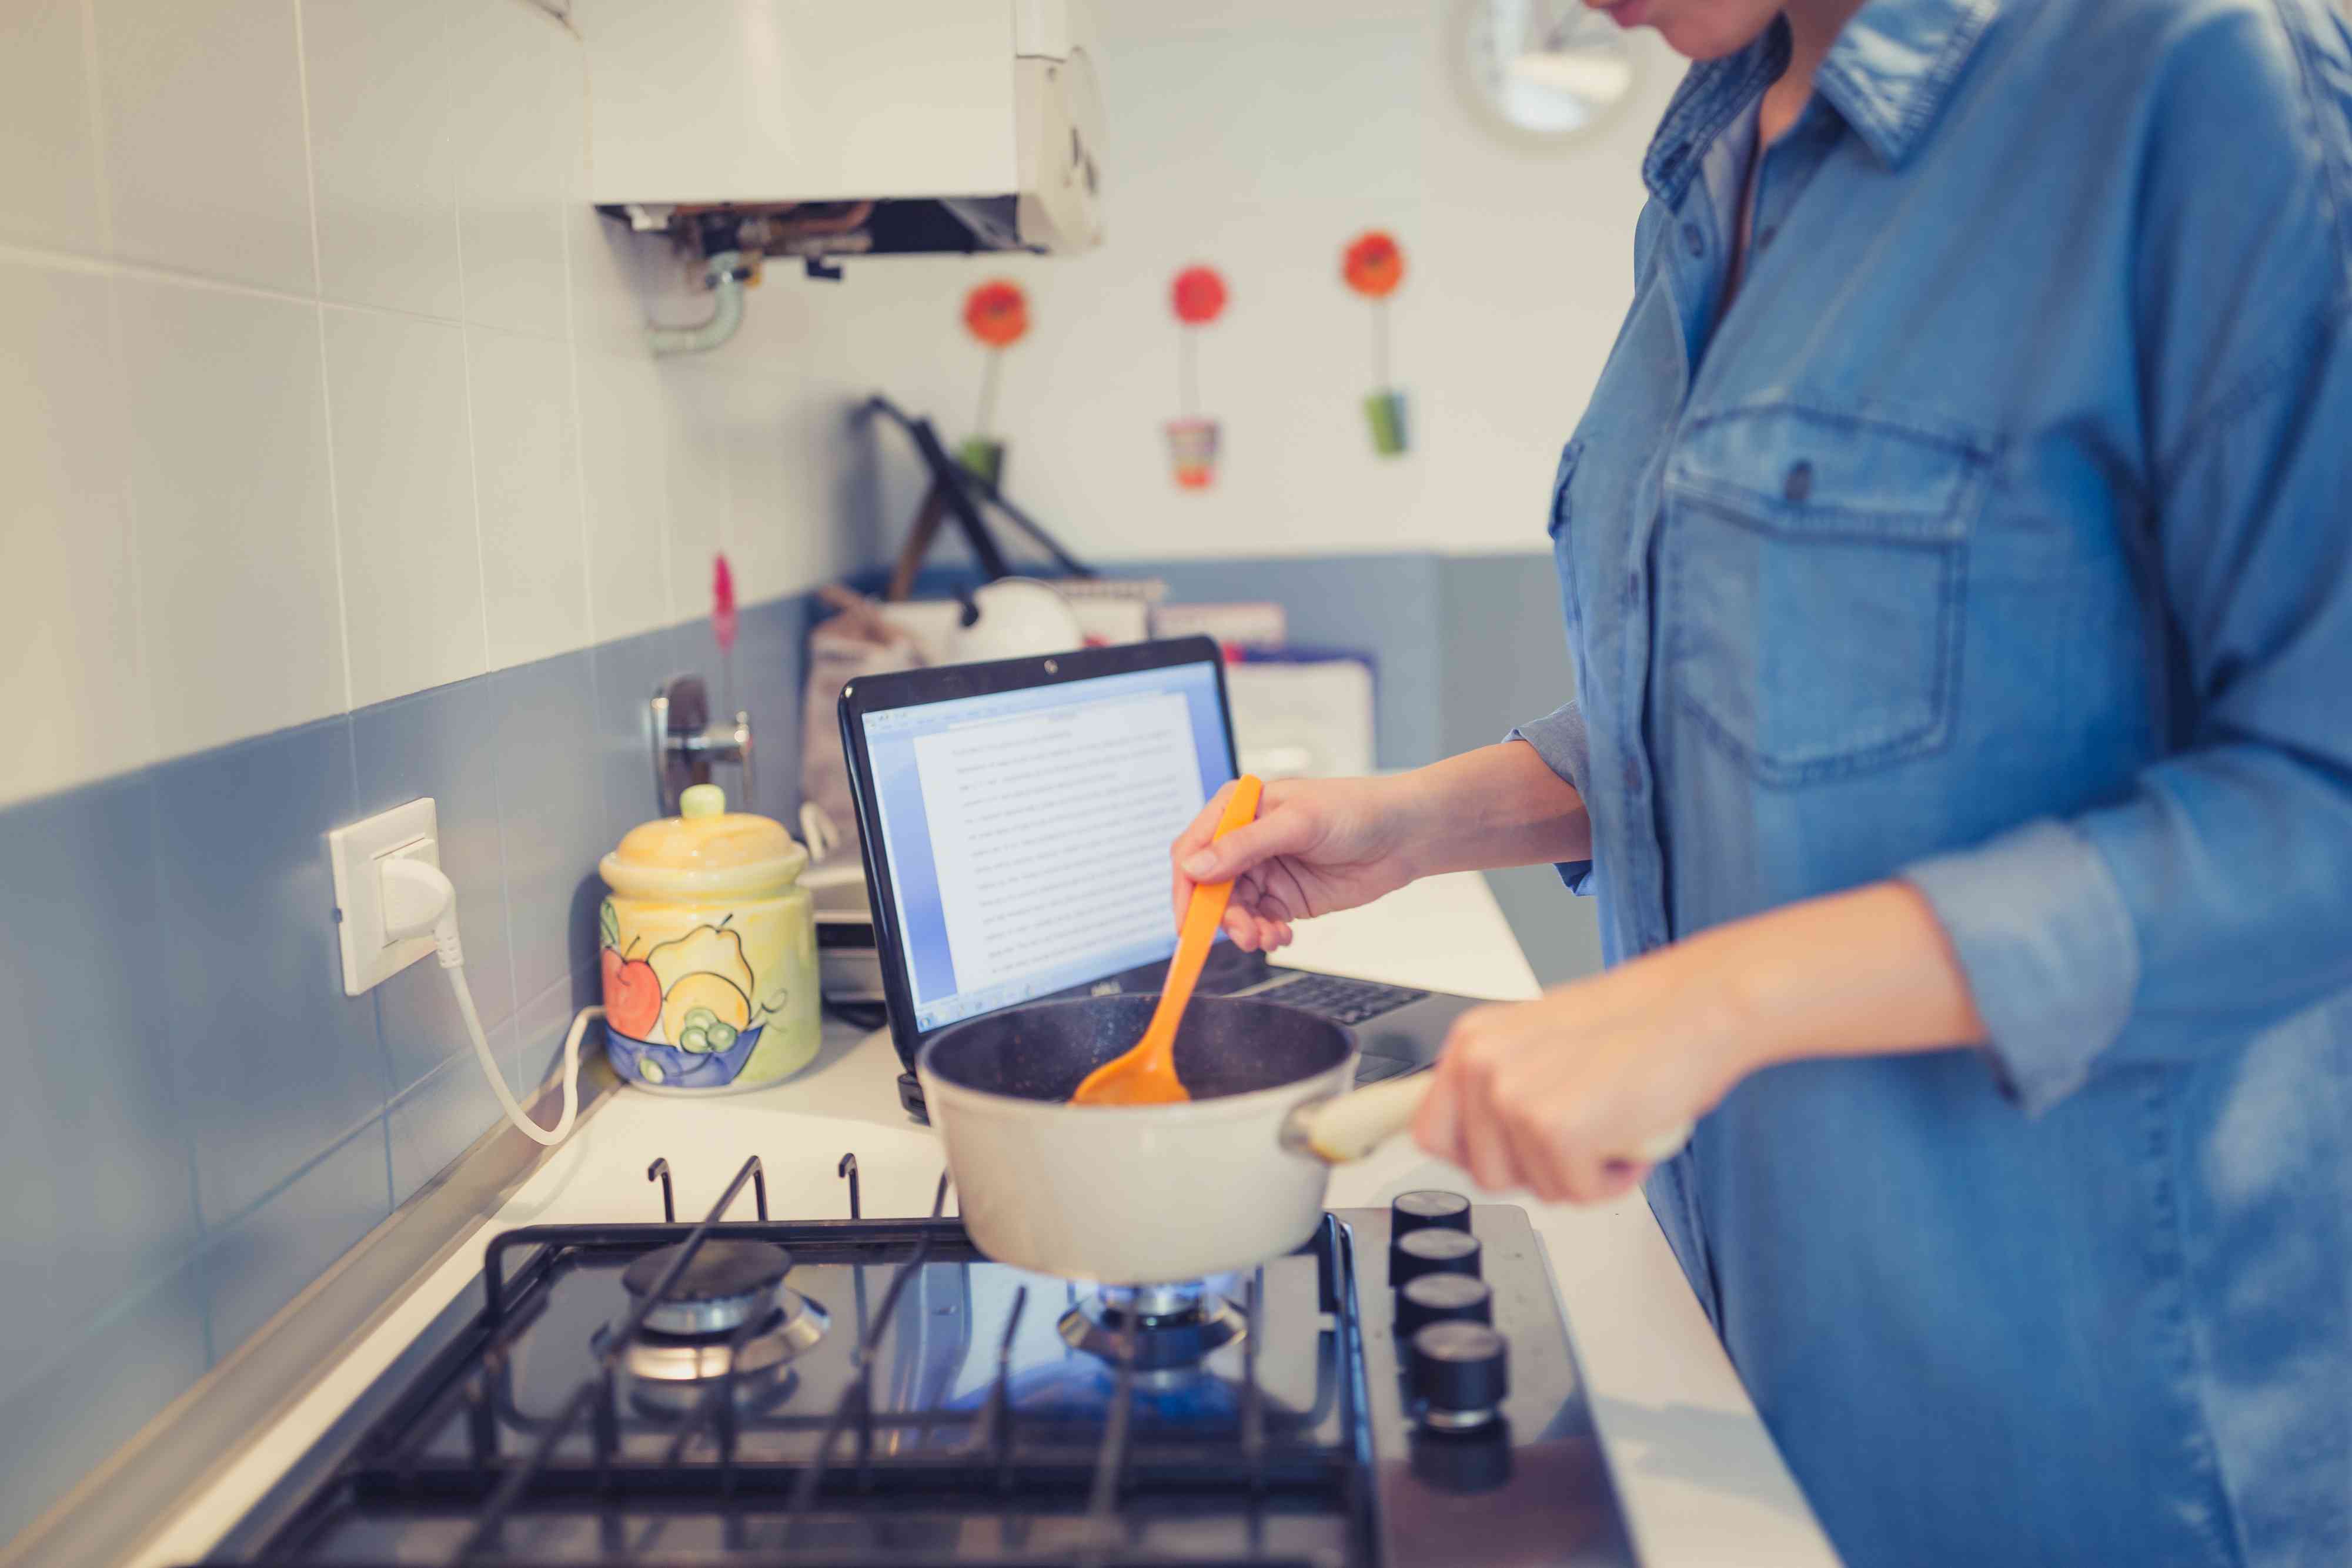 woman cooking while working stock image